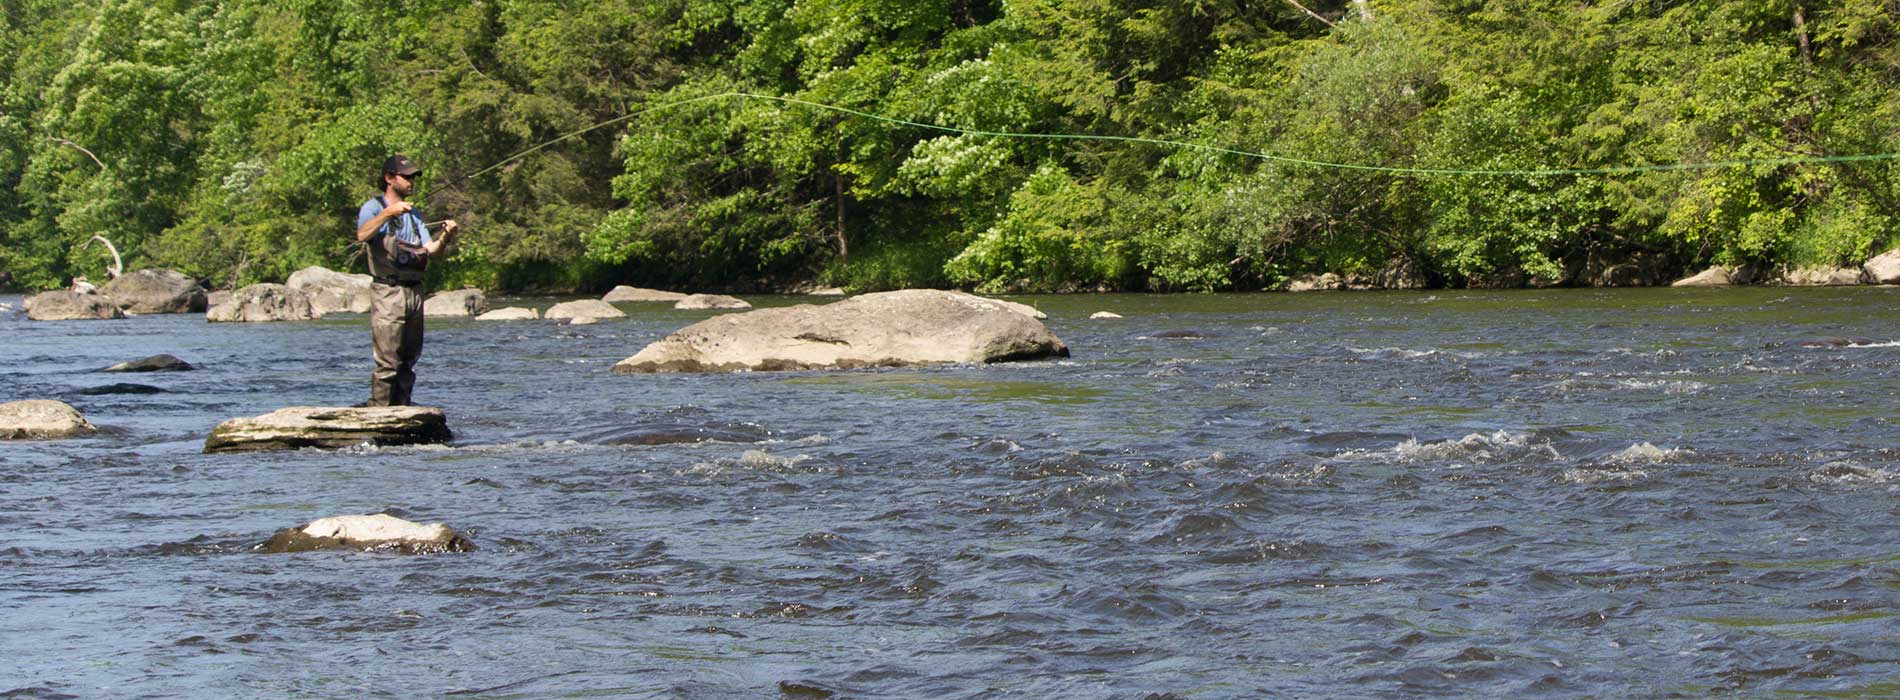 Fishing Trips in The Berkshires of Western Mass.